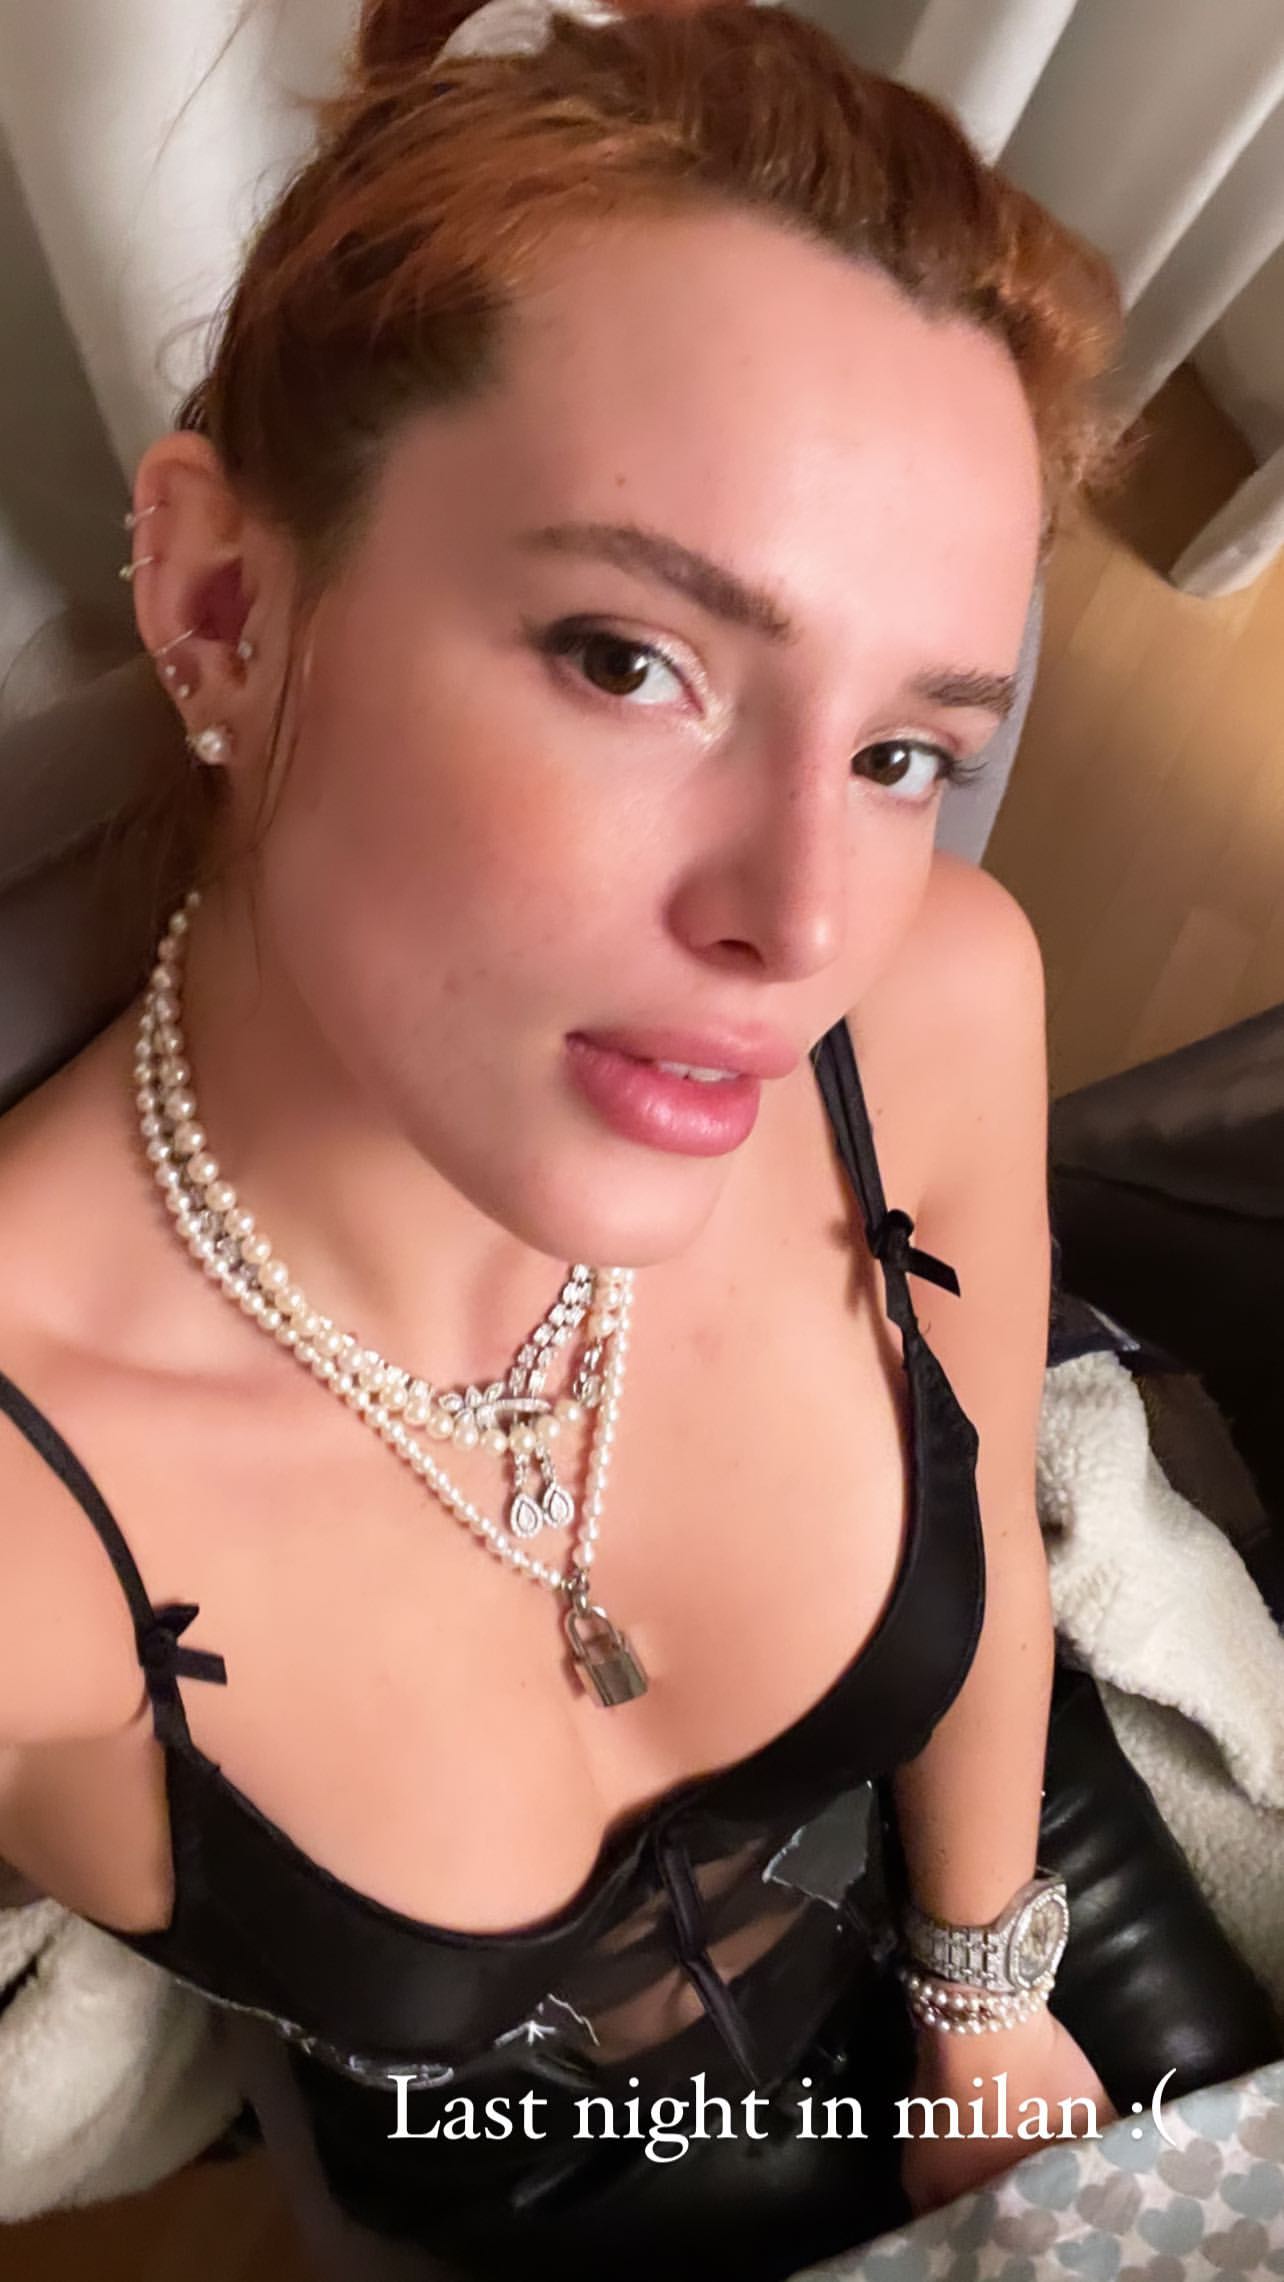 Photos n°5 : Bella Thorne Gets Spoiled for Valentine’s Day!